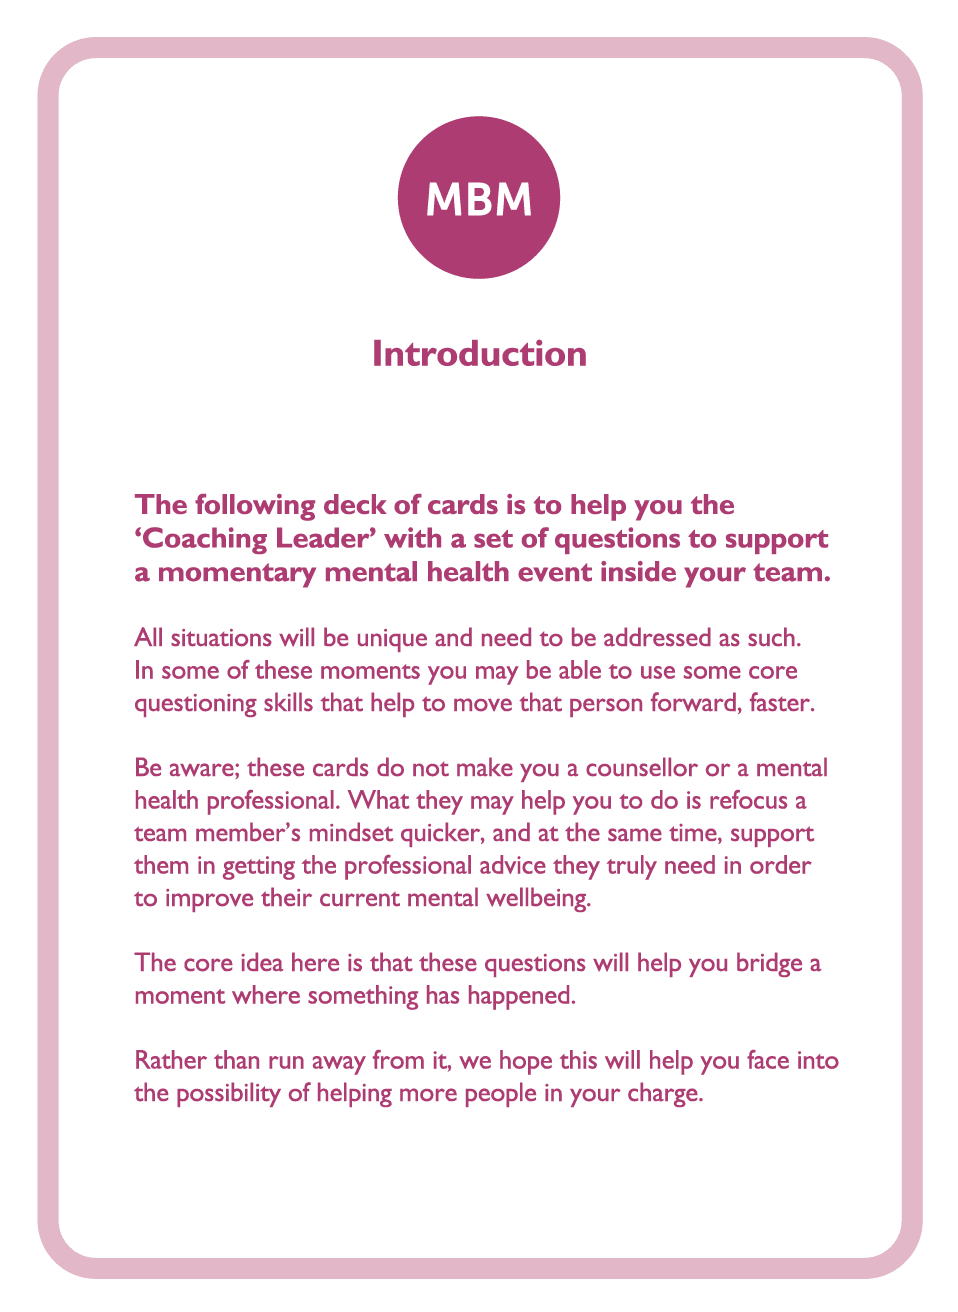 Coaching card with MBM logo and introduction